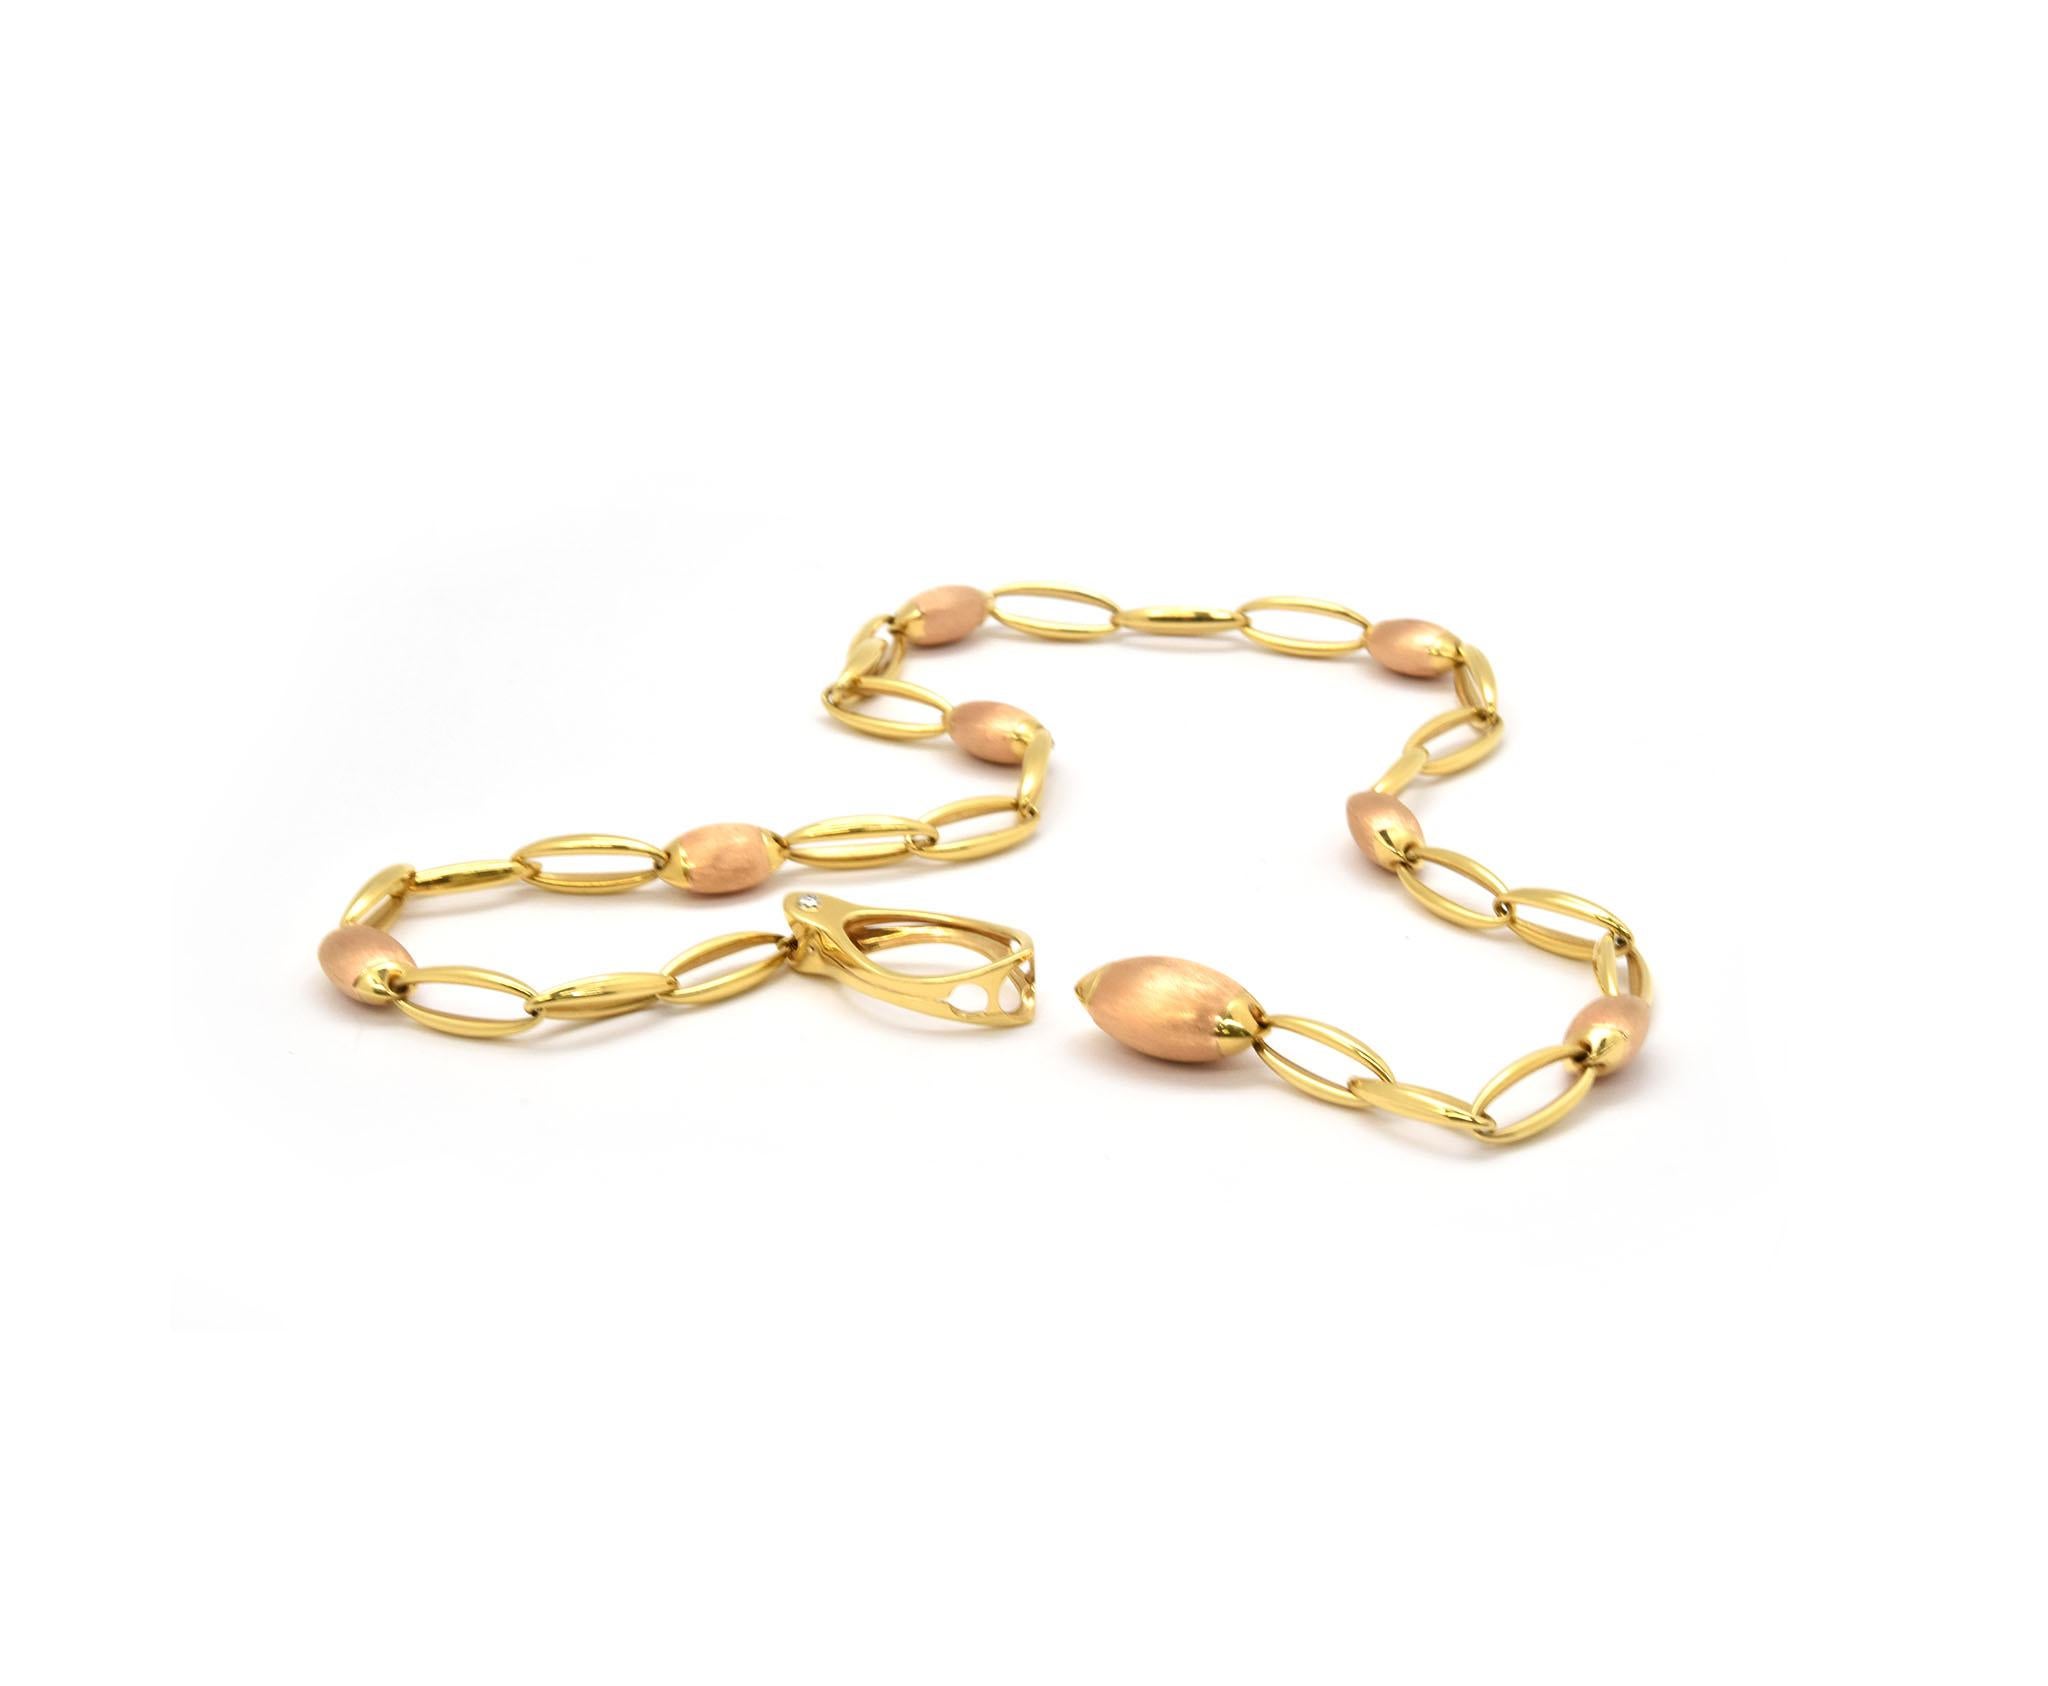 Women's or Men's Chimento 18 Karat Yellow and Rose Gold Oval Link Chain Necklace